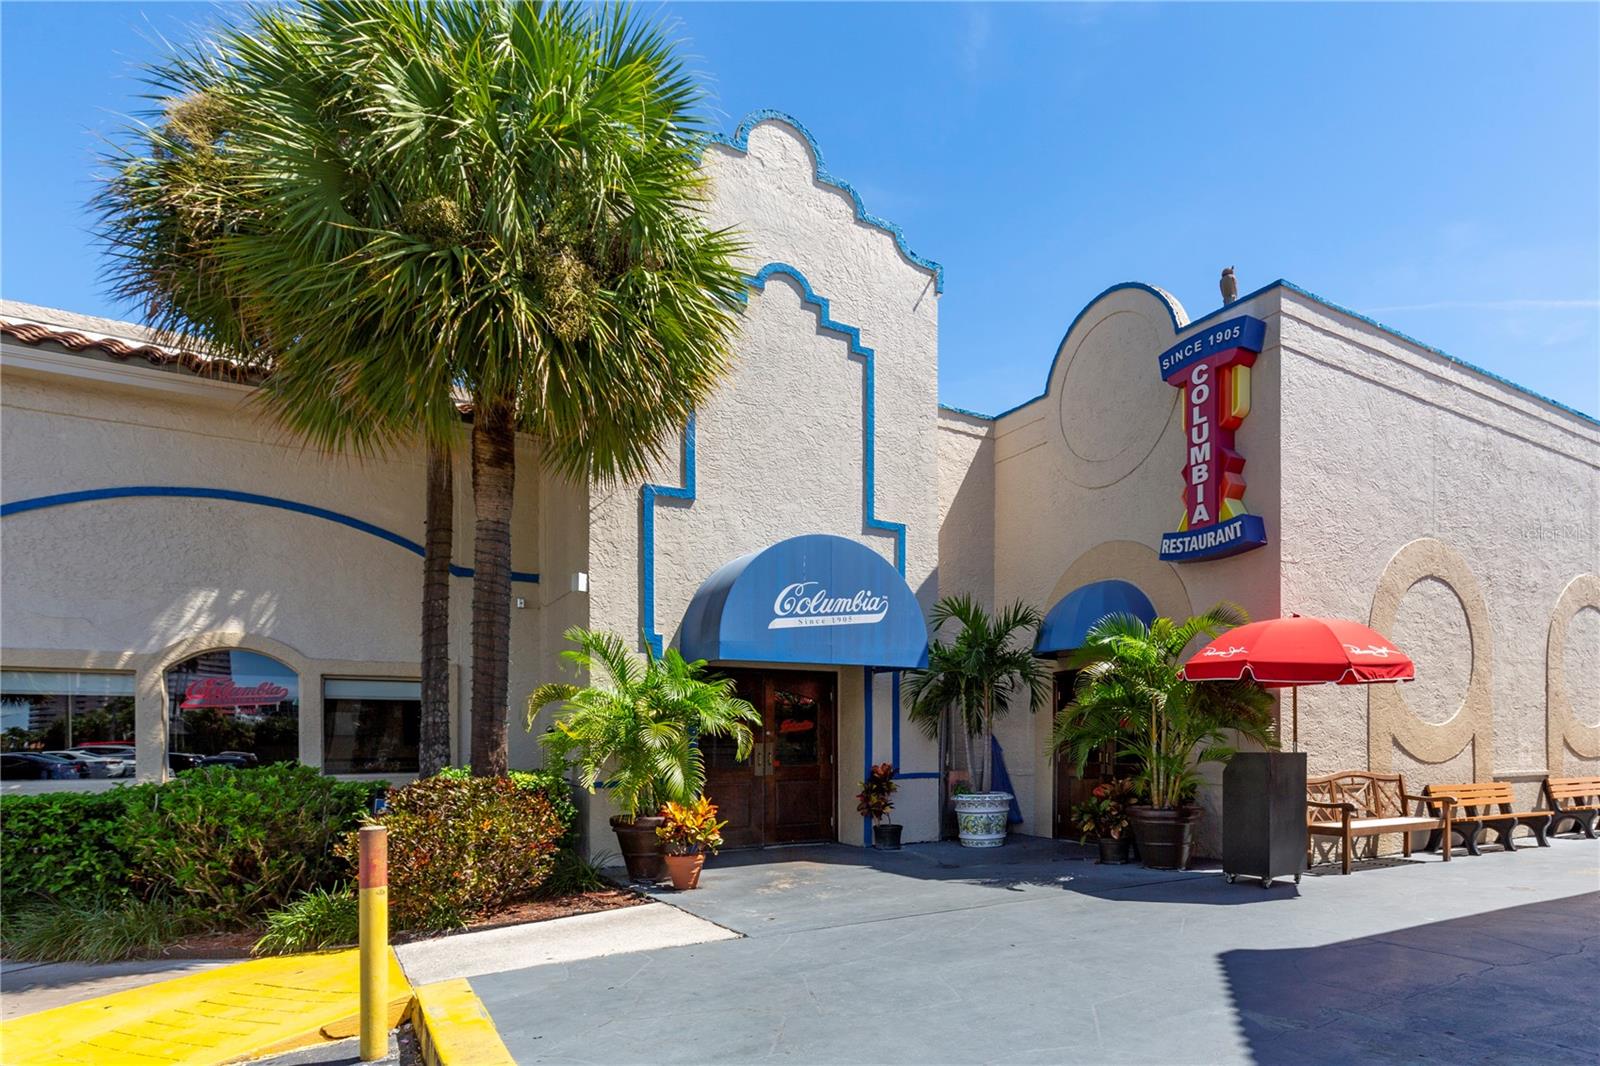 Sand Key Shops and Columbia Restaurant